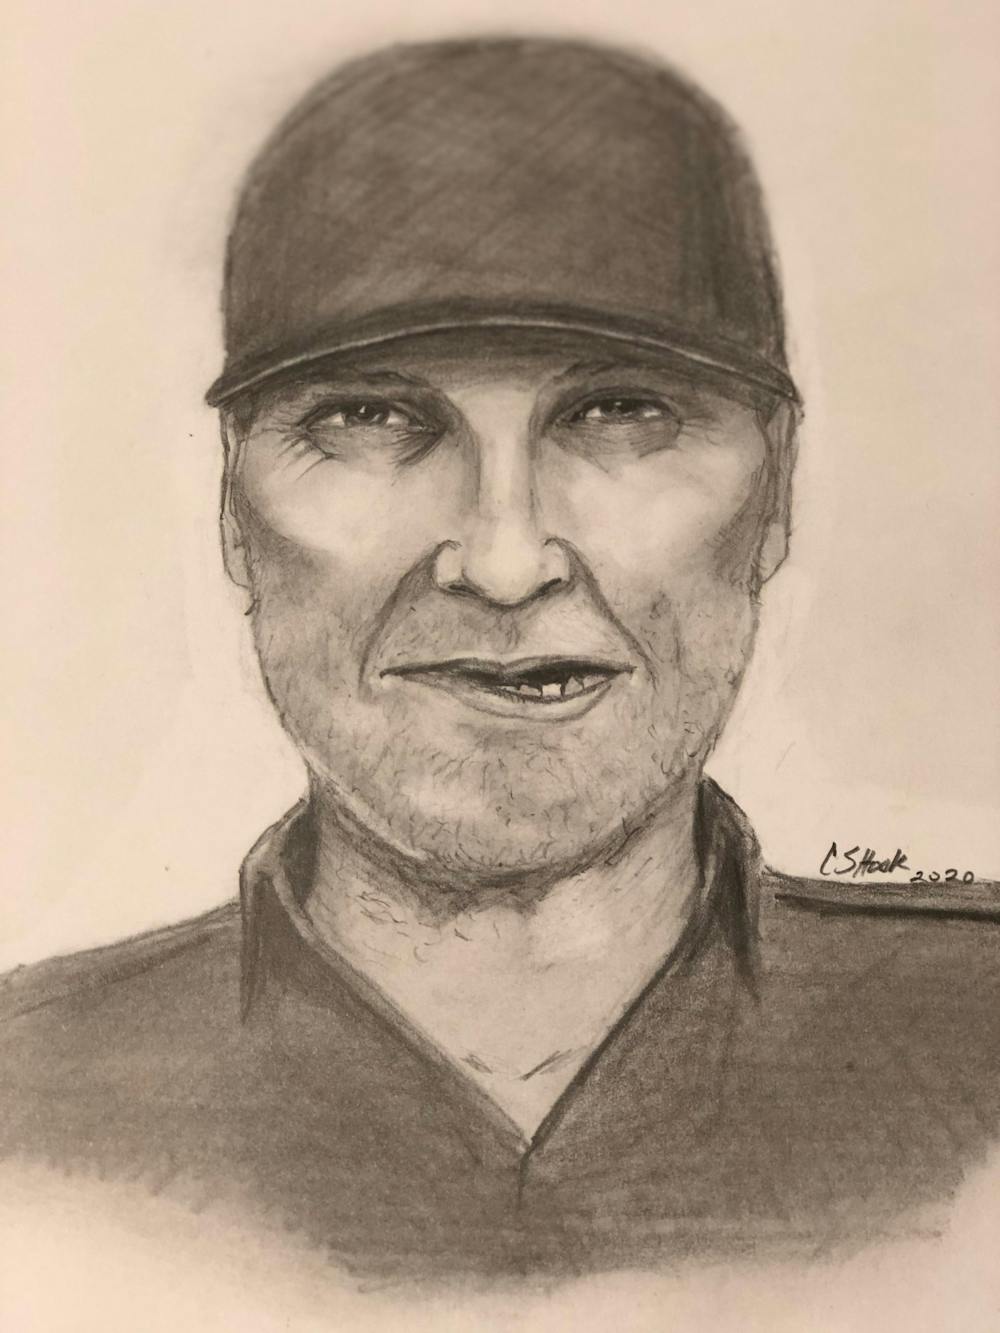 Sketch of Suspect released by police